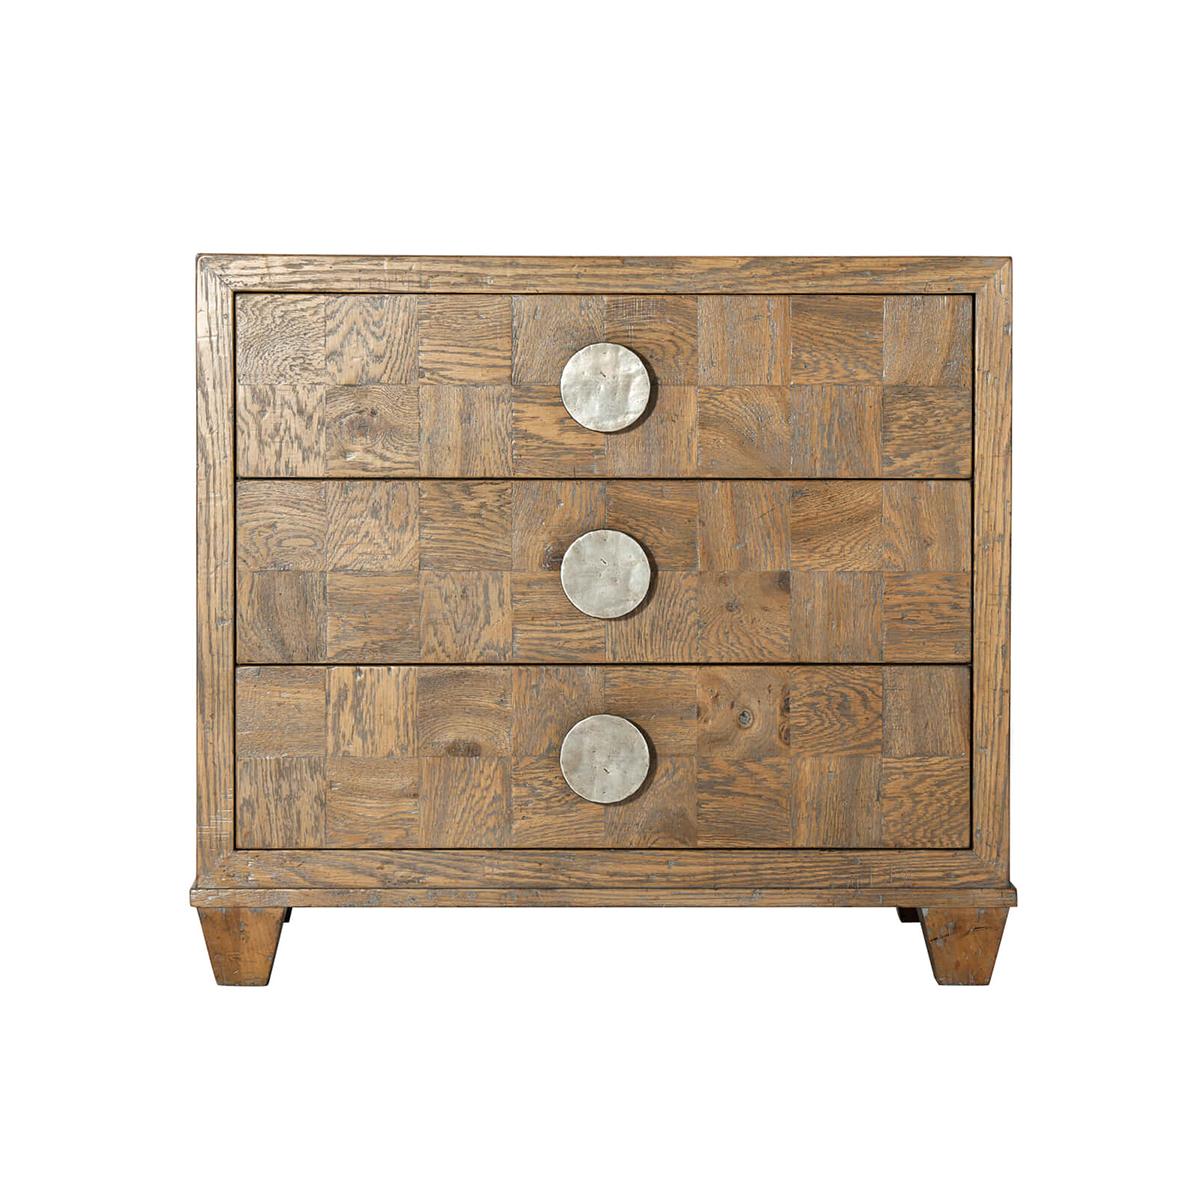 An Oak parquetry nightstand, handcrafted with rustic oak parquetry seen here in our Light Echo Oak finish with picture frame parquetry top and sides. This nightstand includes three checkered parquetry soft-close drawers, vintage textured metal disc